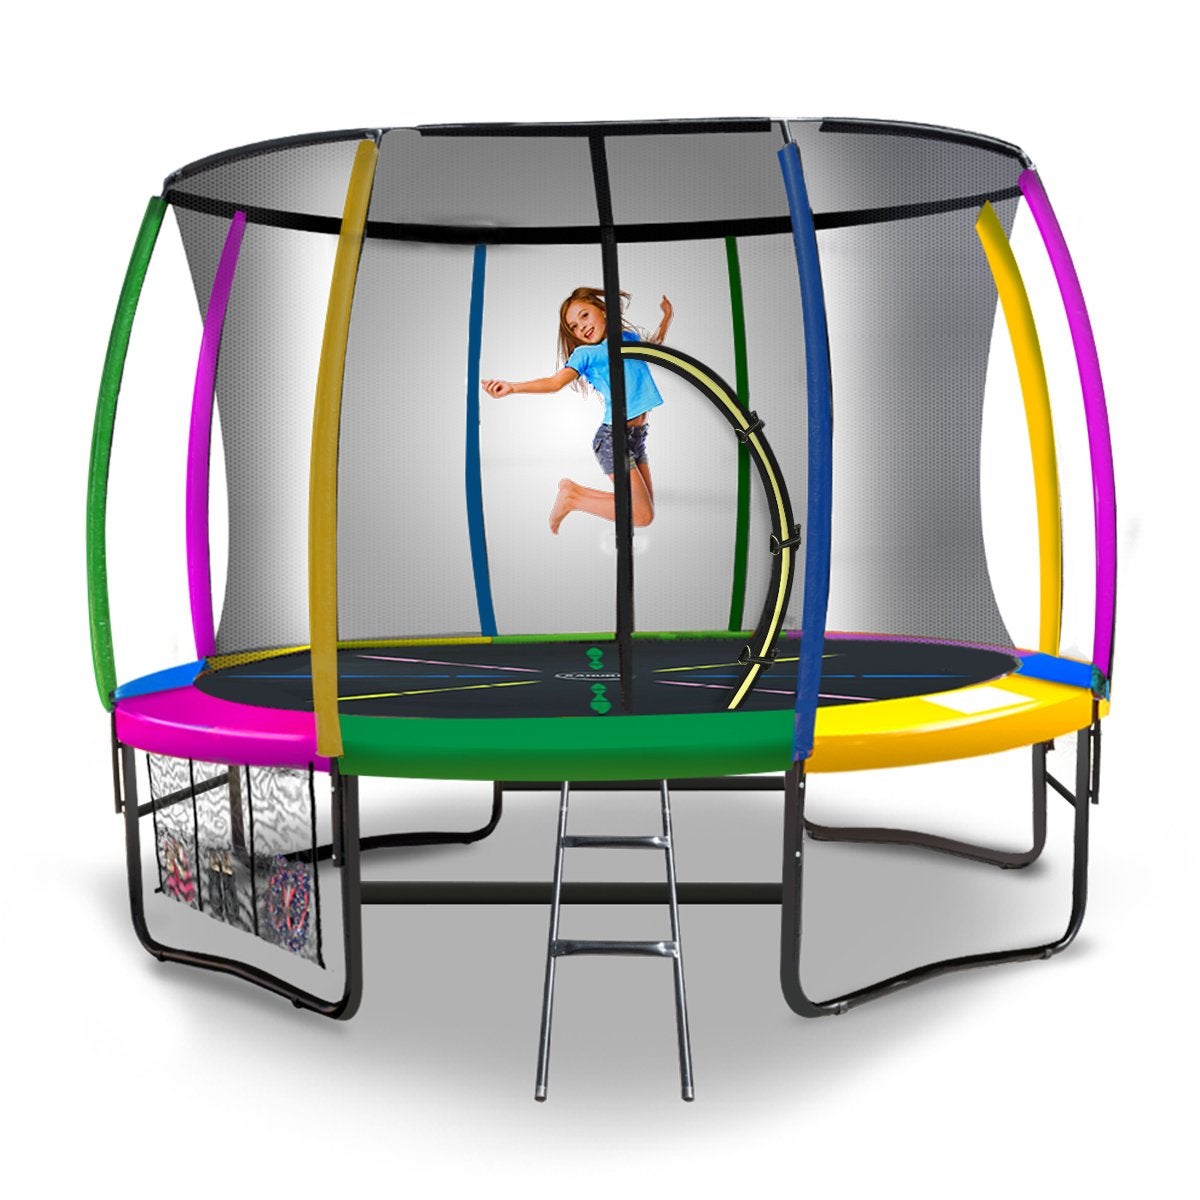 Kahuna 10 Ft Trampoline With Rainbow Safety Pad